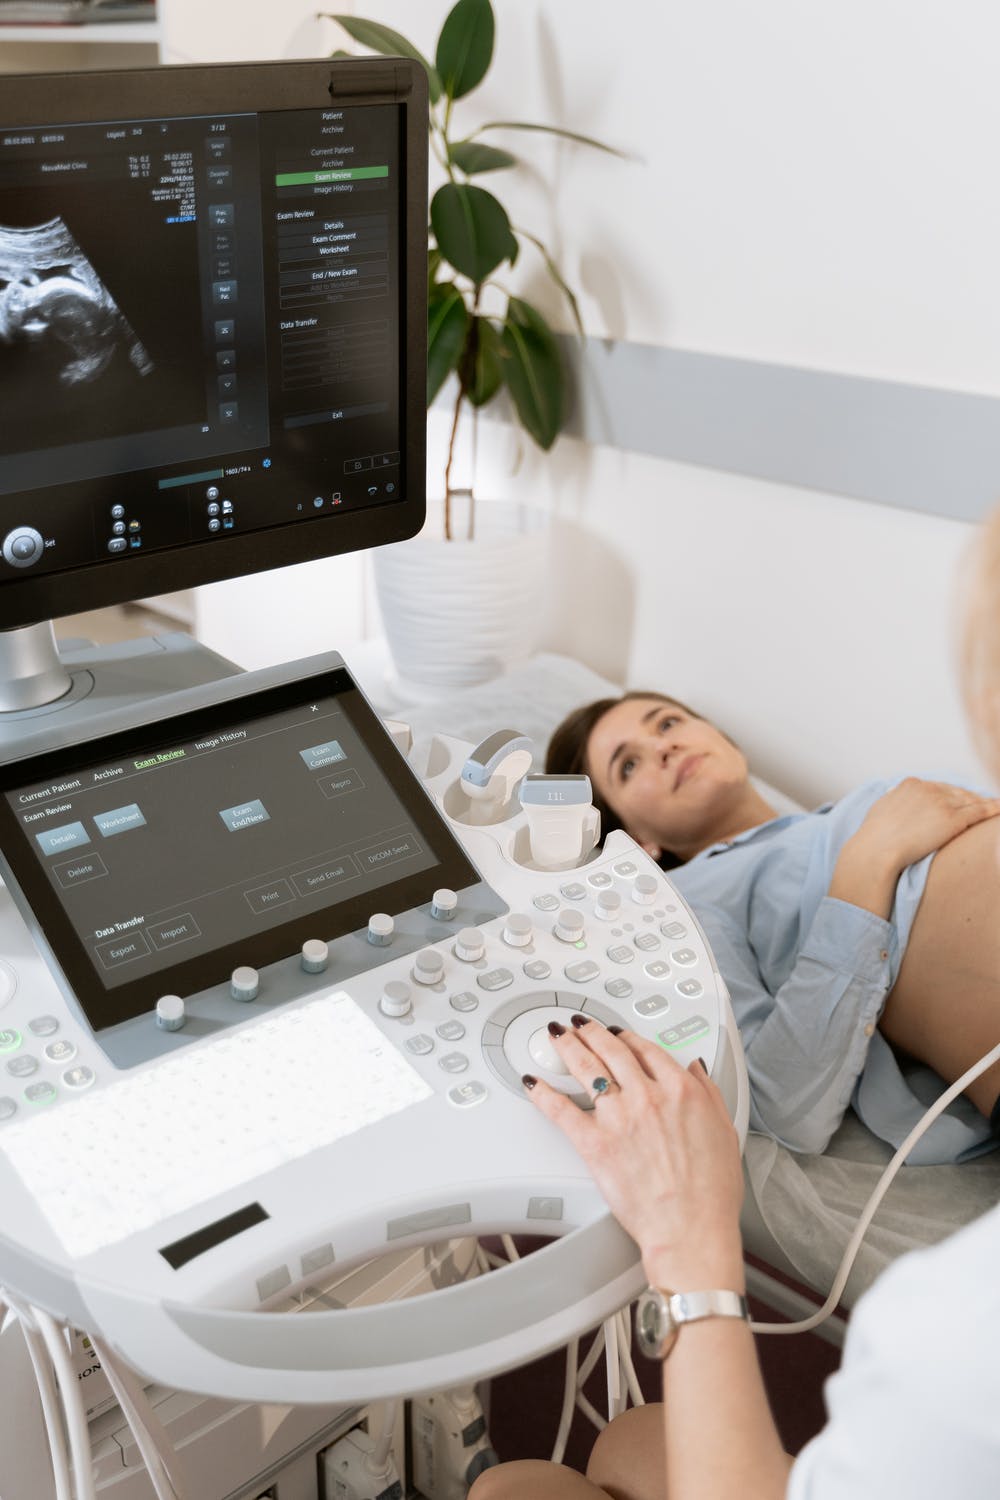 A hand reaches out to use an ultrasound machine, made in the Medtech industry, for a pregnant woman